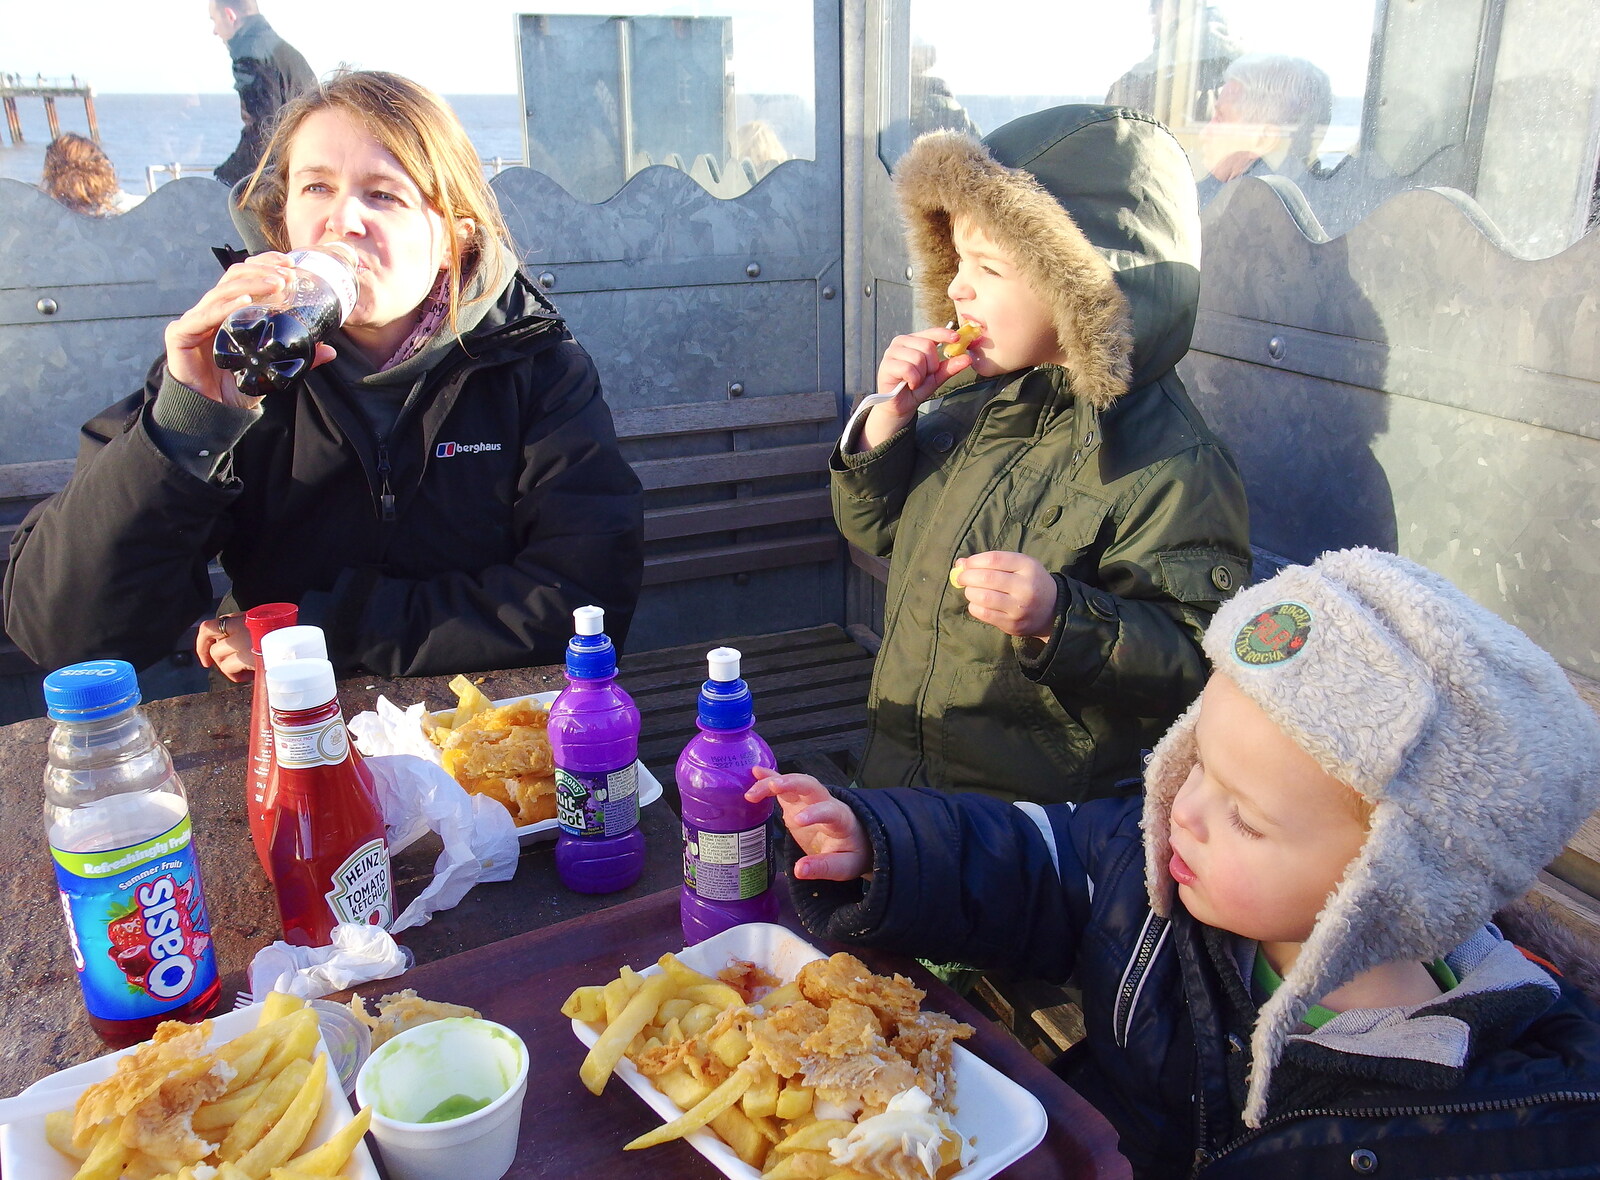 Eating Fish and Chips in the cold from Post-Christmas Southwold, Suffolk - 29th December 2013